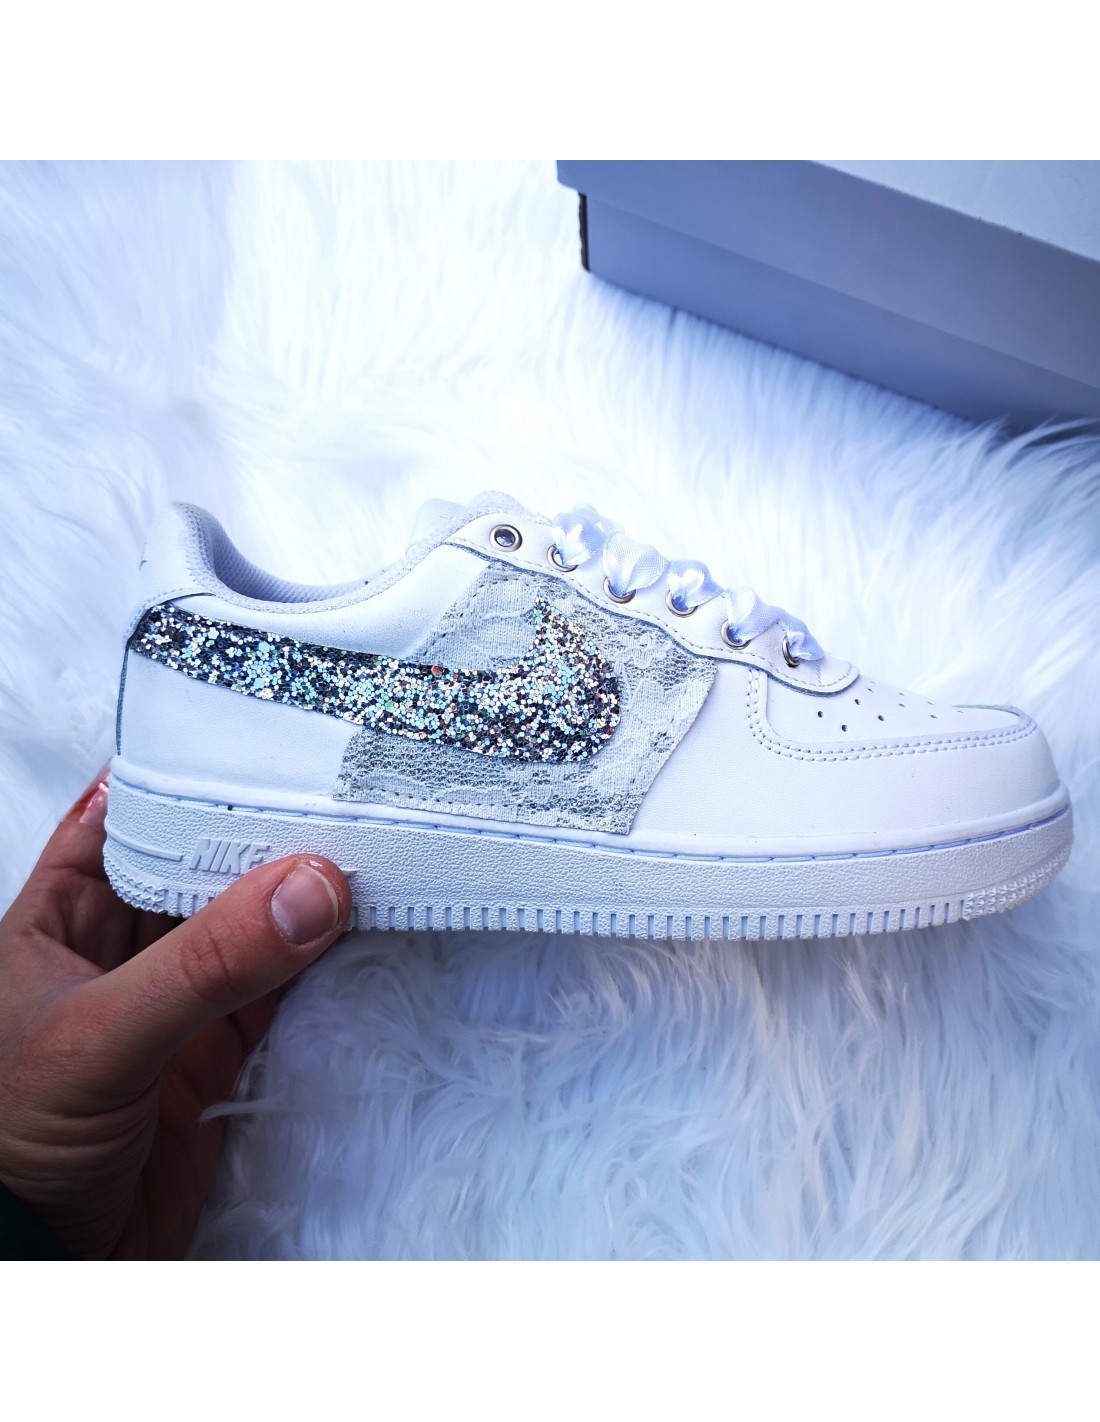 Nike Air Force One AF1 Glitter Argento e Pizzo